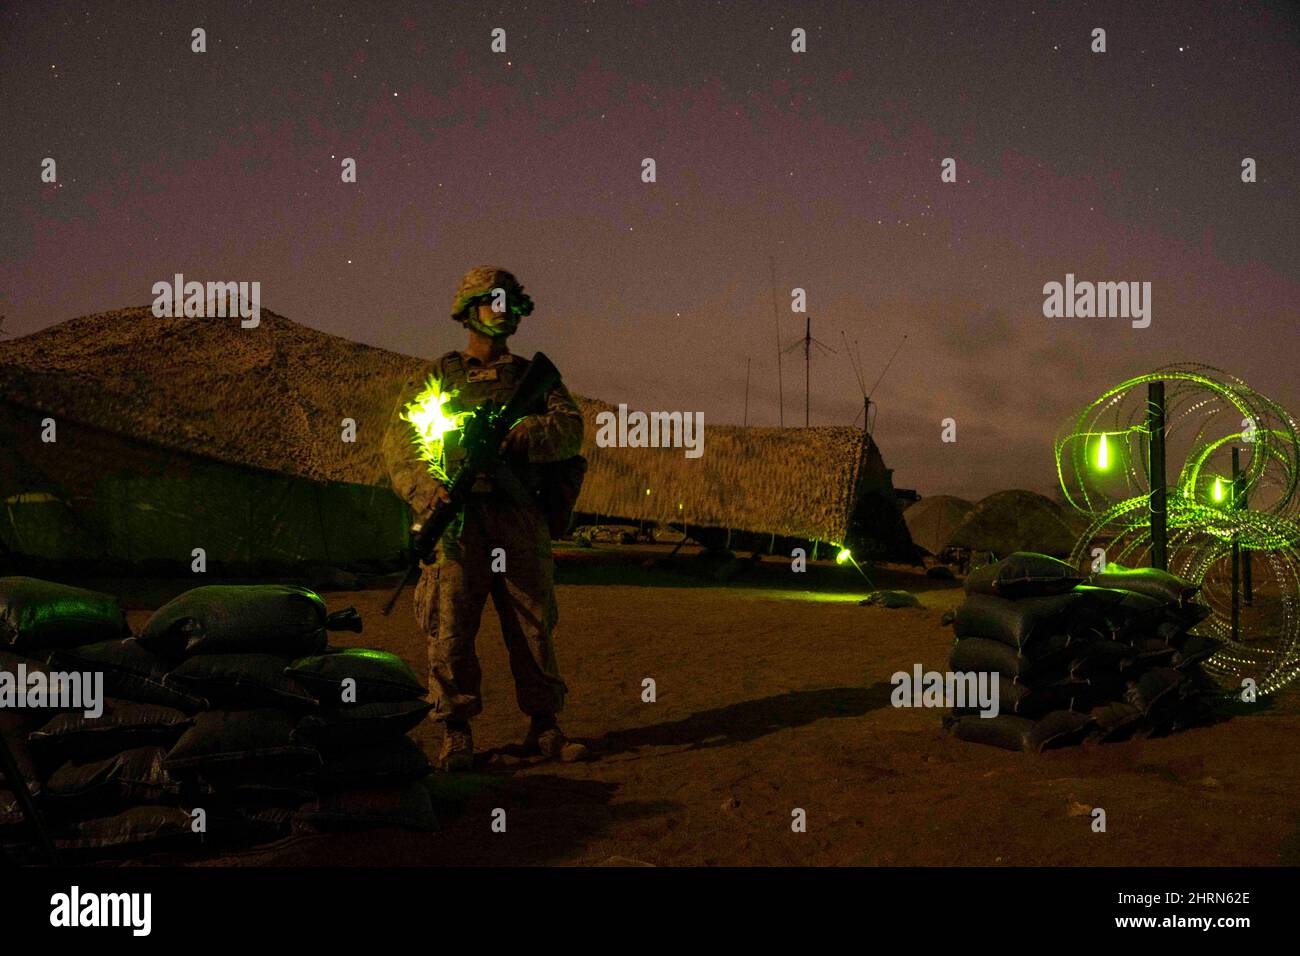 Djibouti. 8th Feb, 2022. U.S. Marine Corps Cpl. Adrian Nieves, a data systems administrator with Marine Air Control Group Detachment East Africa Air Combat Element, conducts night watch during a joint command and control exercise at Quaid Range, Djibouti, Feb. 8, 2022. The MACG Det supports Combined Joint Task Force Horn of Africa (CJTF-HOA) by providing rapid communication capability for ground and air assets. The multi-day exercise demonstrated the MACG's ability to rapidly conduct command and control operations in a forward deployed location. (Credit Image: © U.S. Air Force/ZUMA Pres Stock Photo